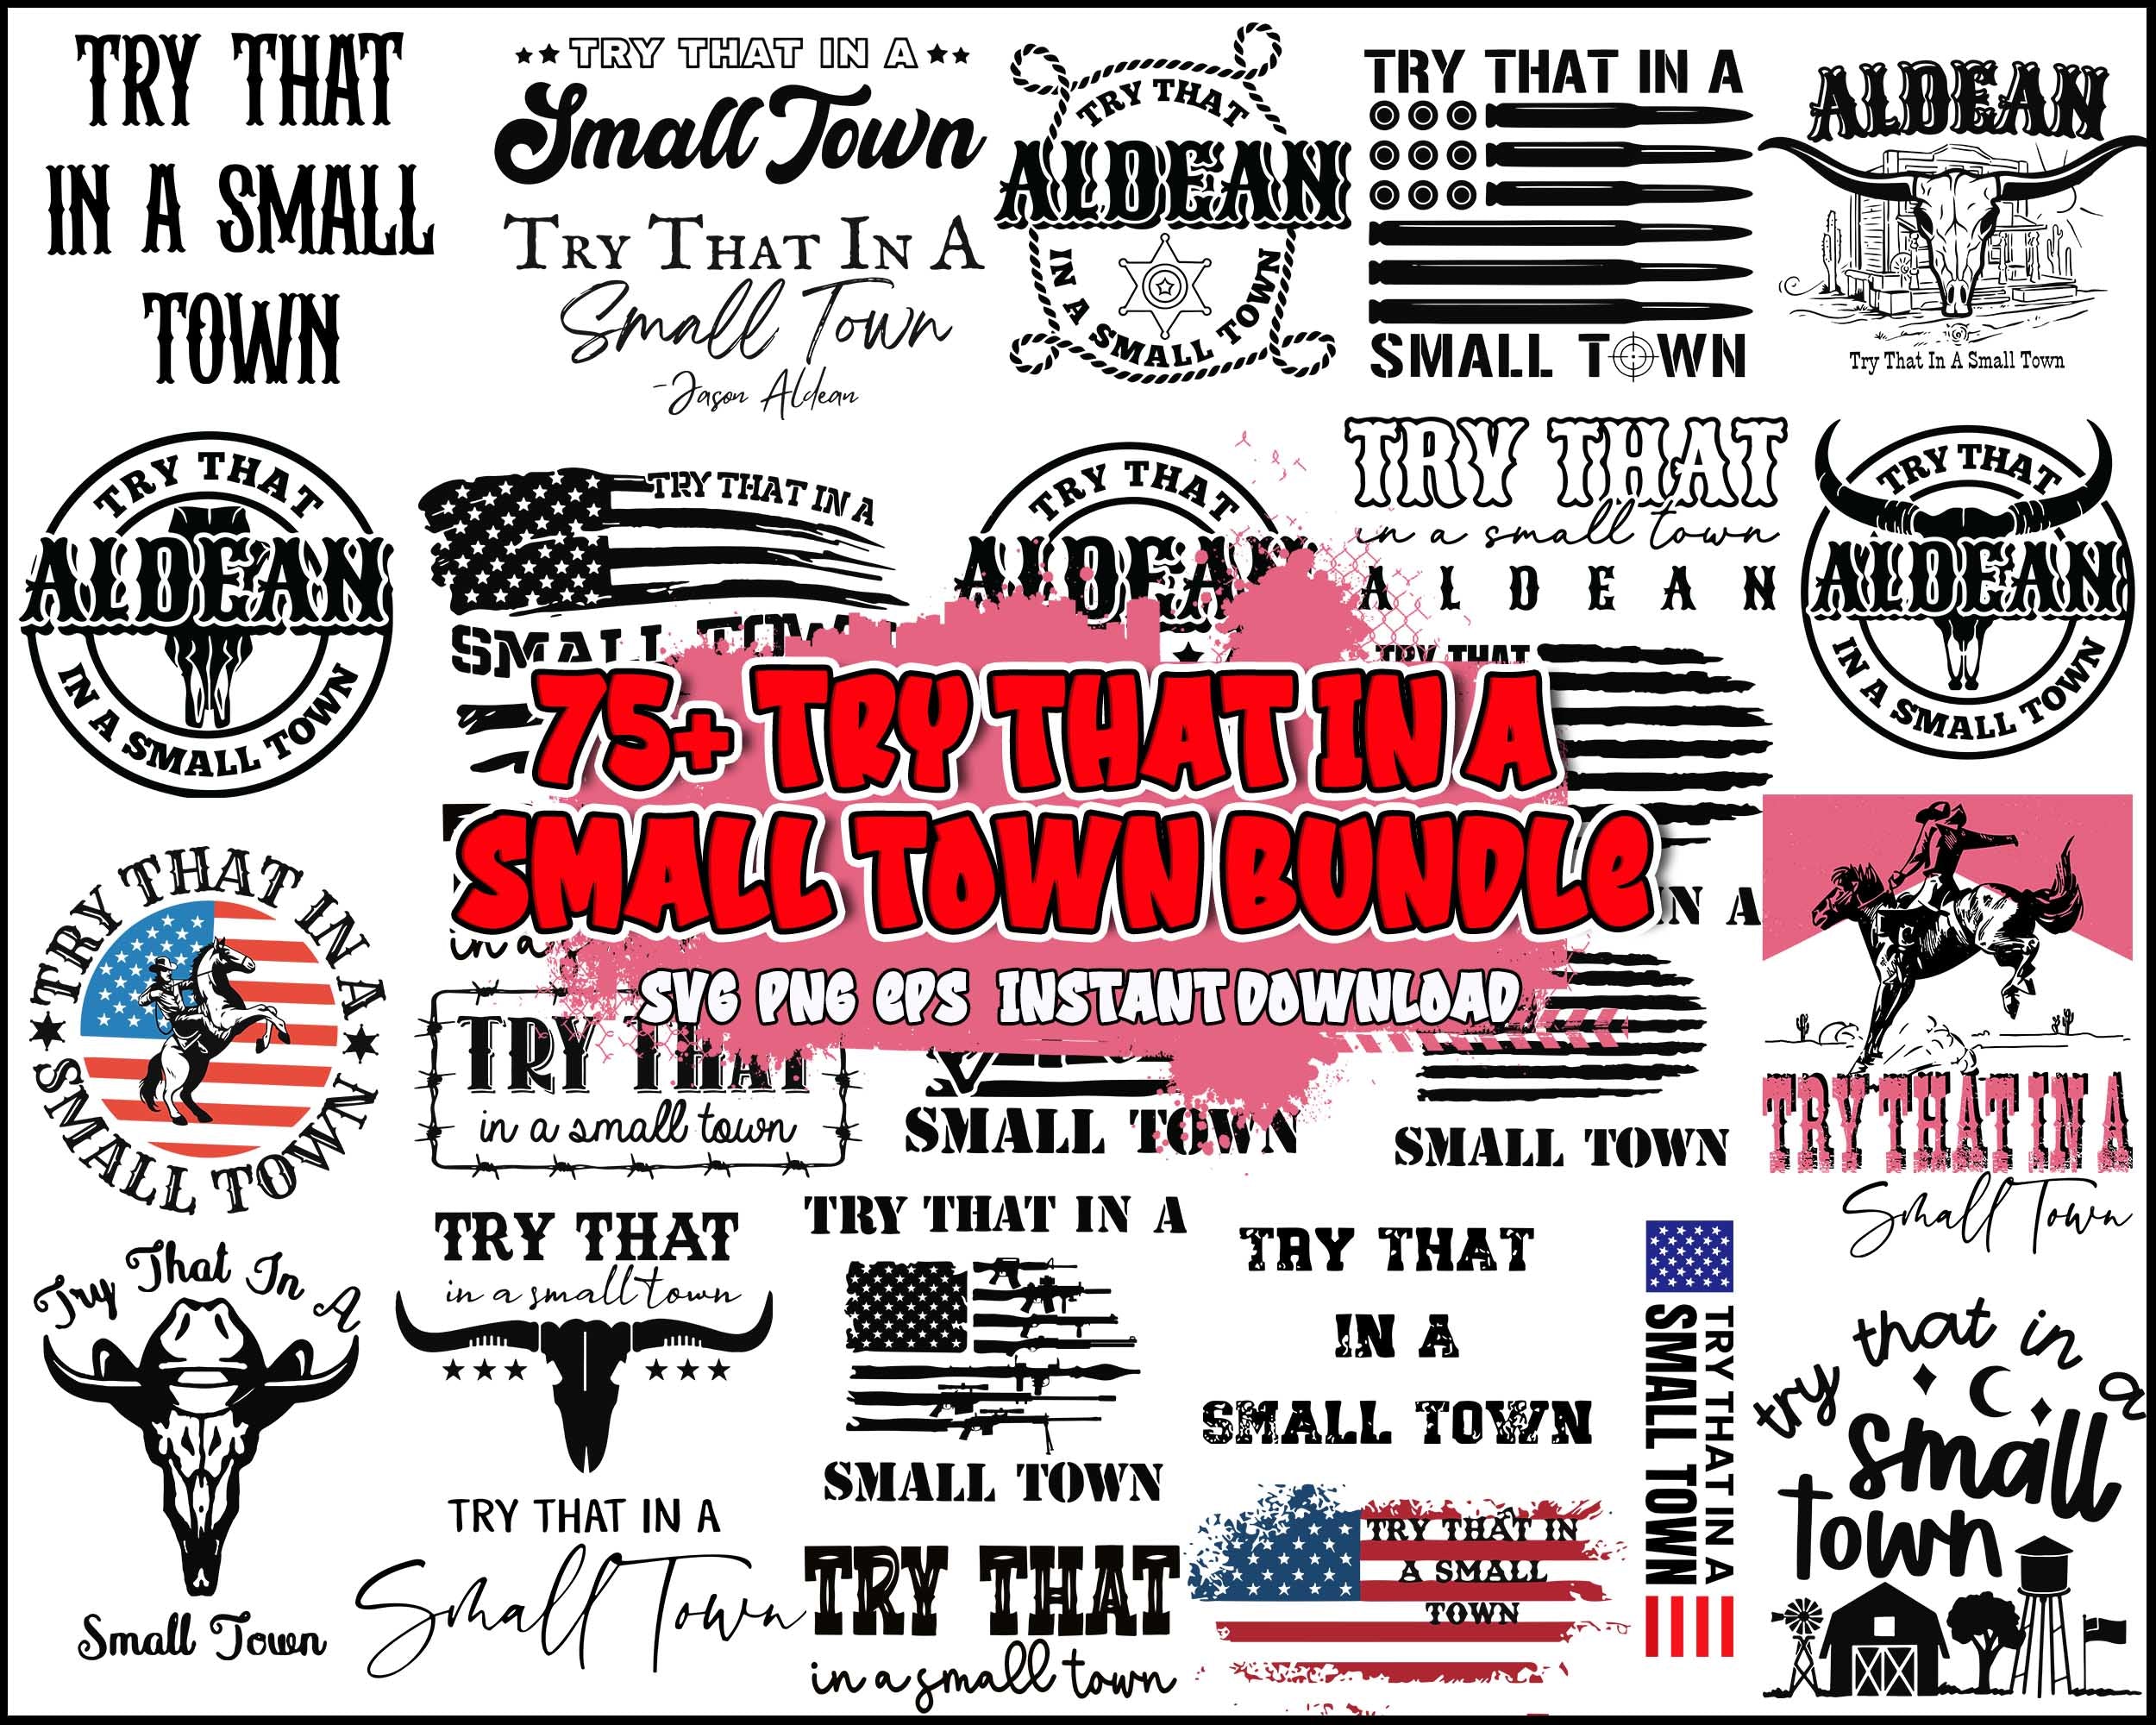 75+ Try That In A Small Town bundle svg, Instant Download